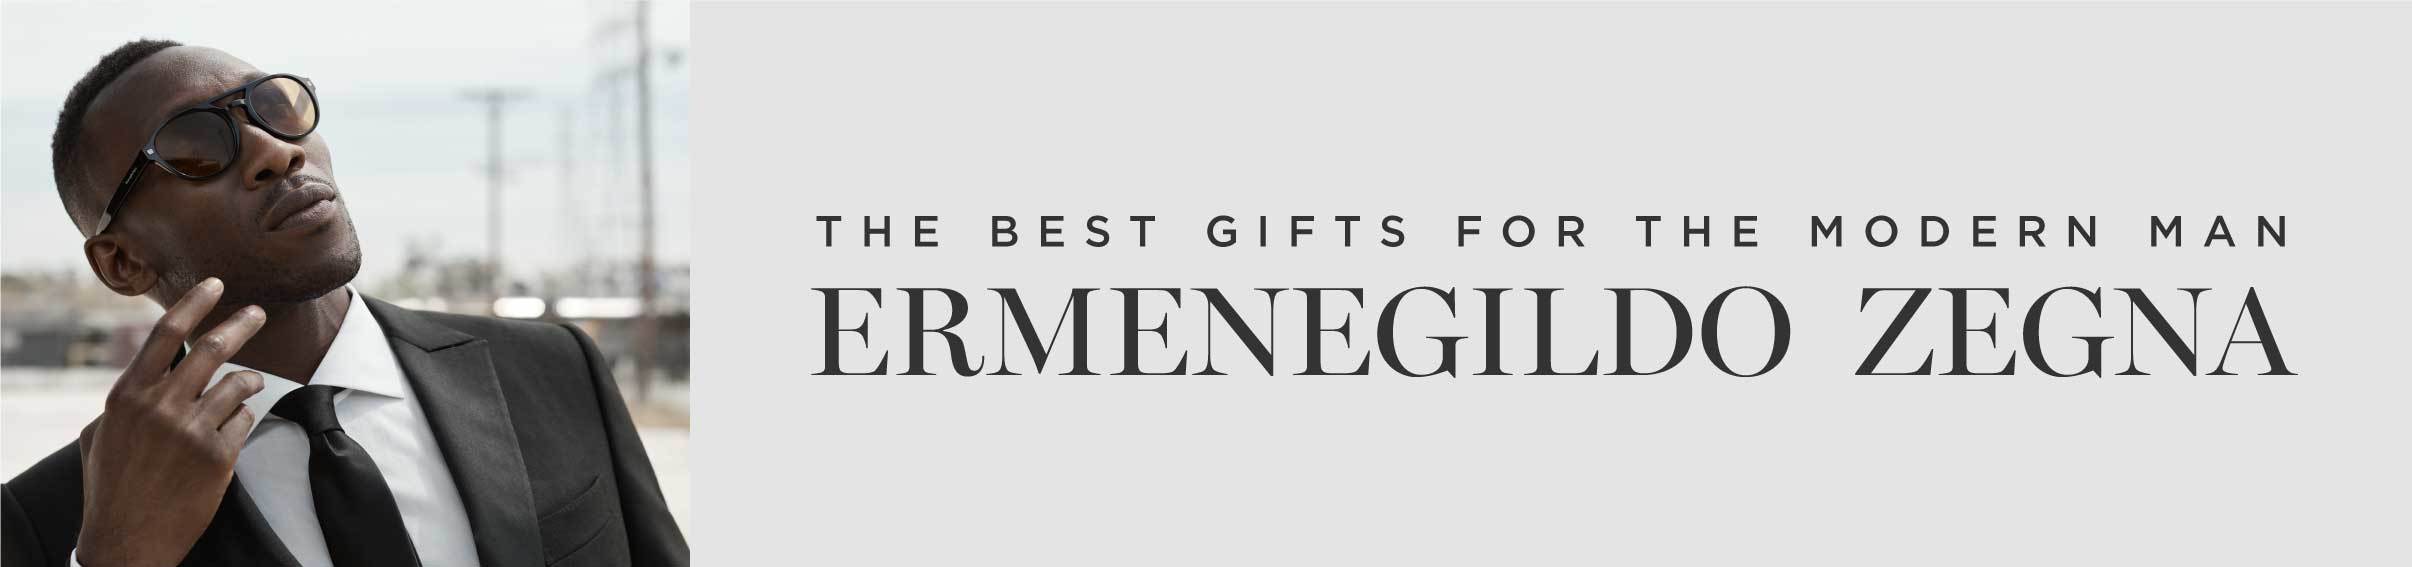 Best gifts from Zegna 